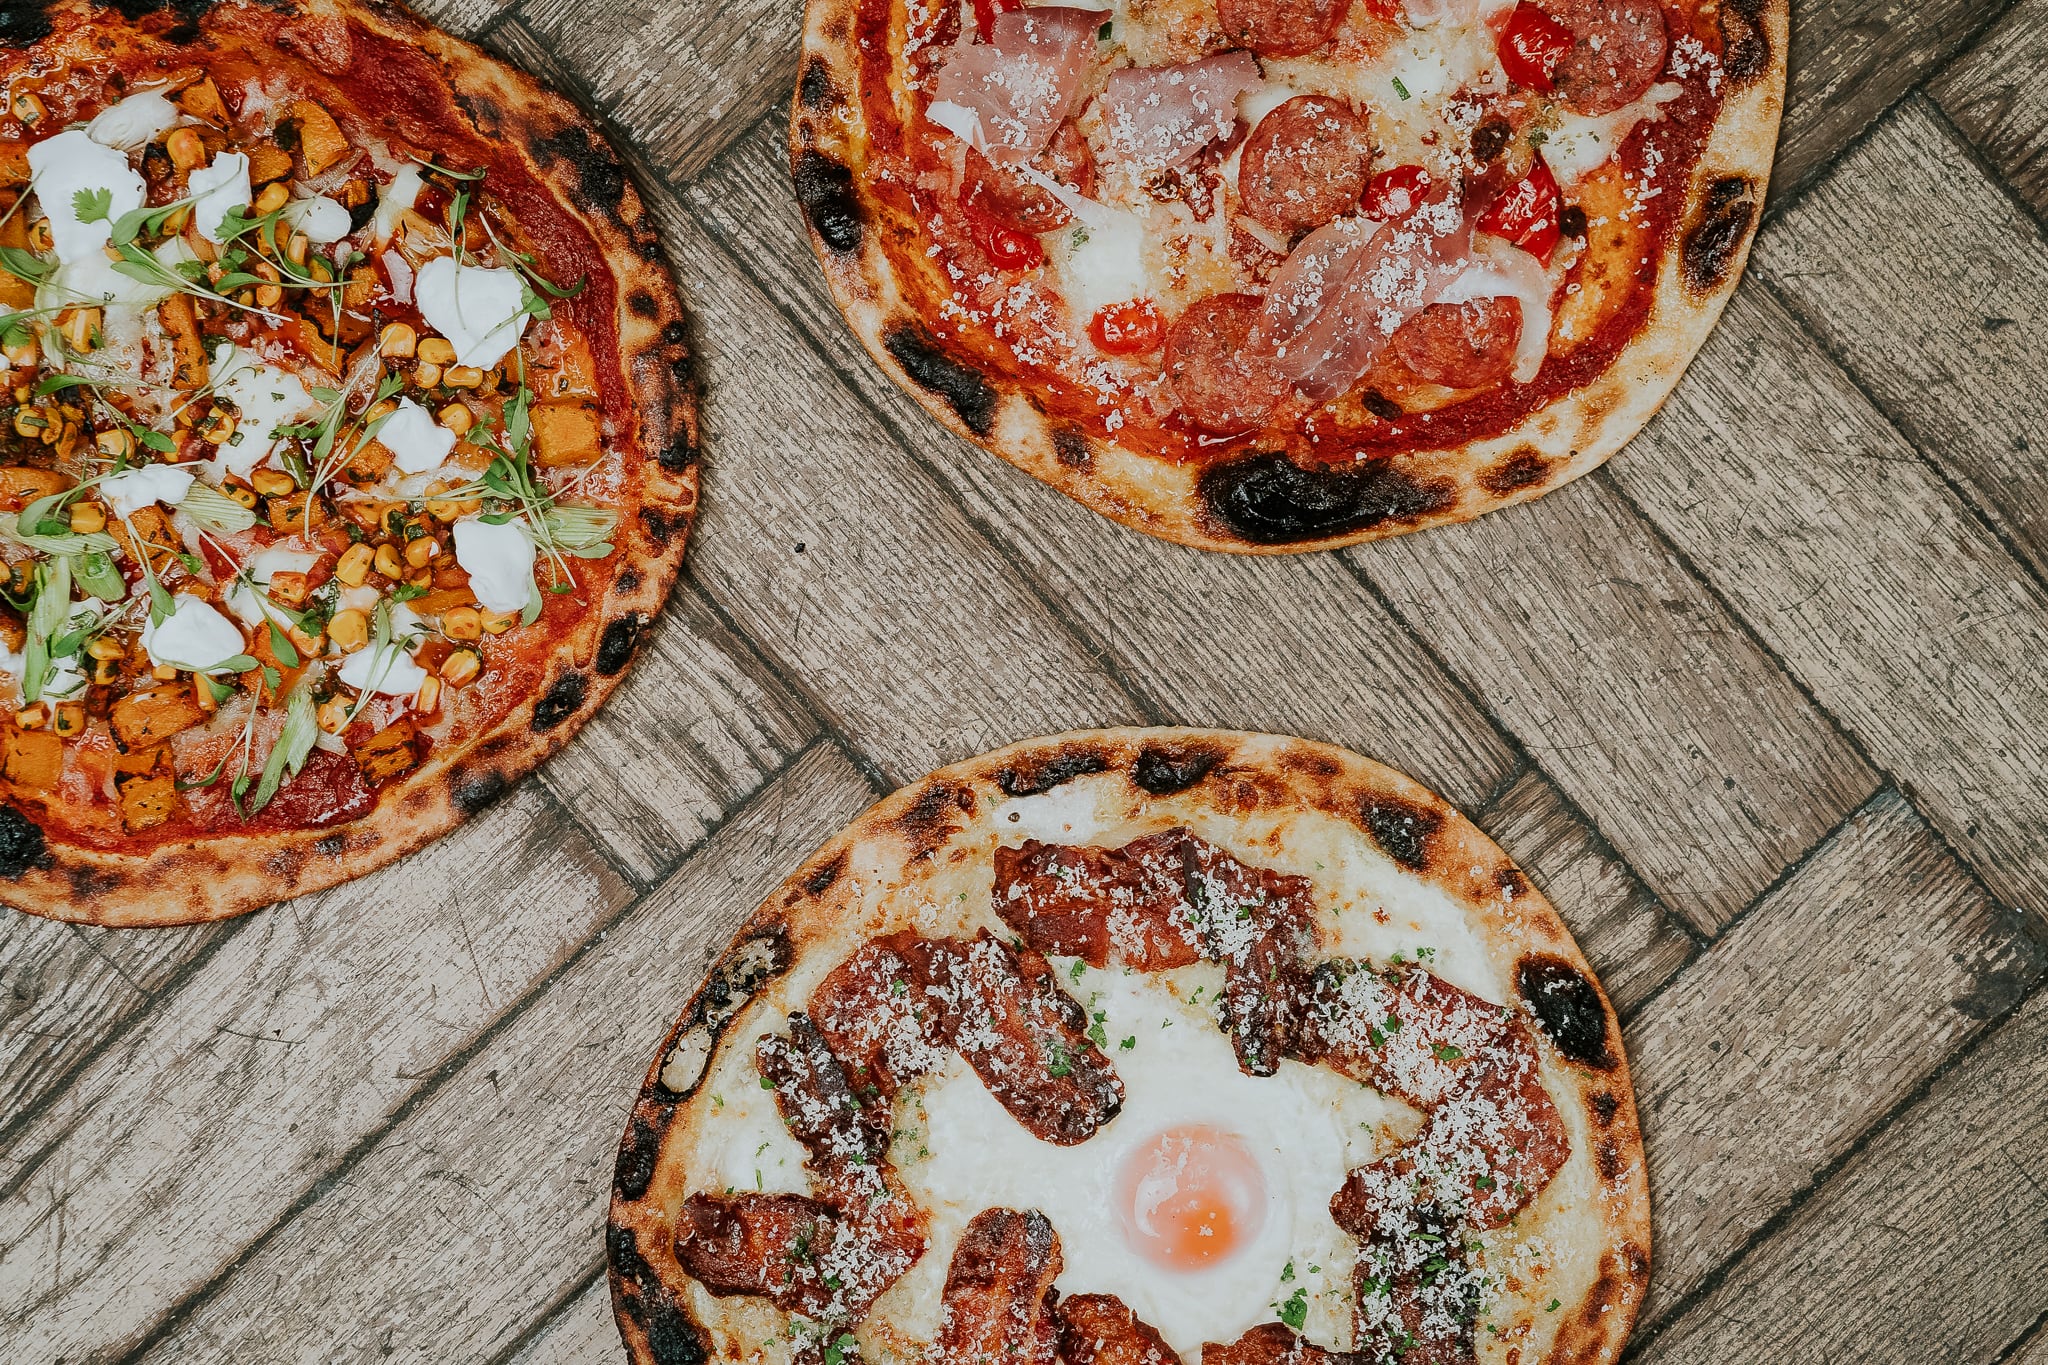 Freshly baked pizzas placed on a wooden table